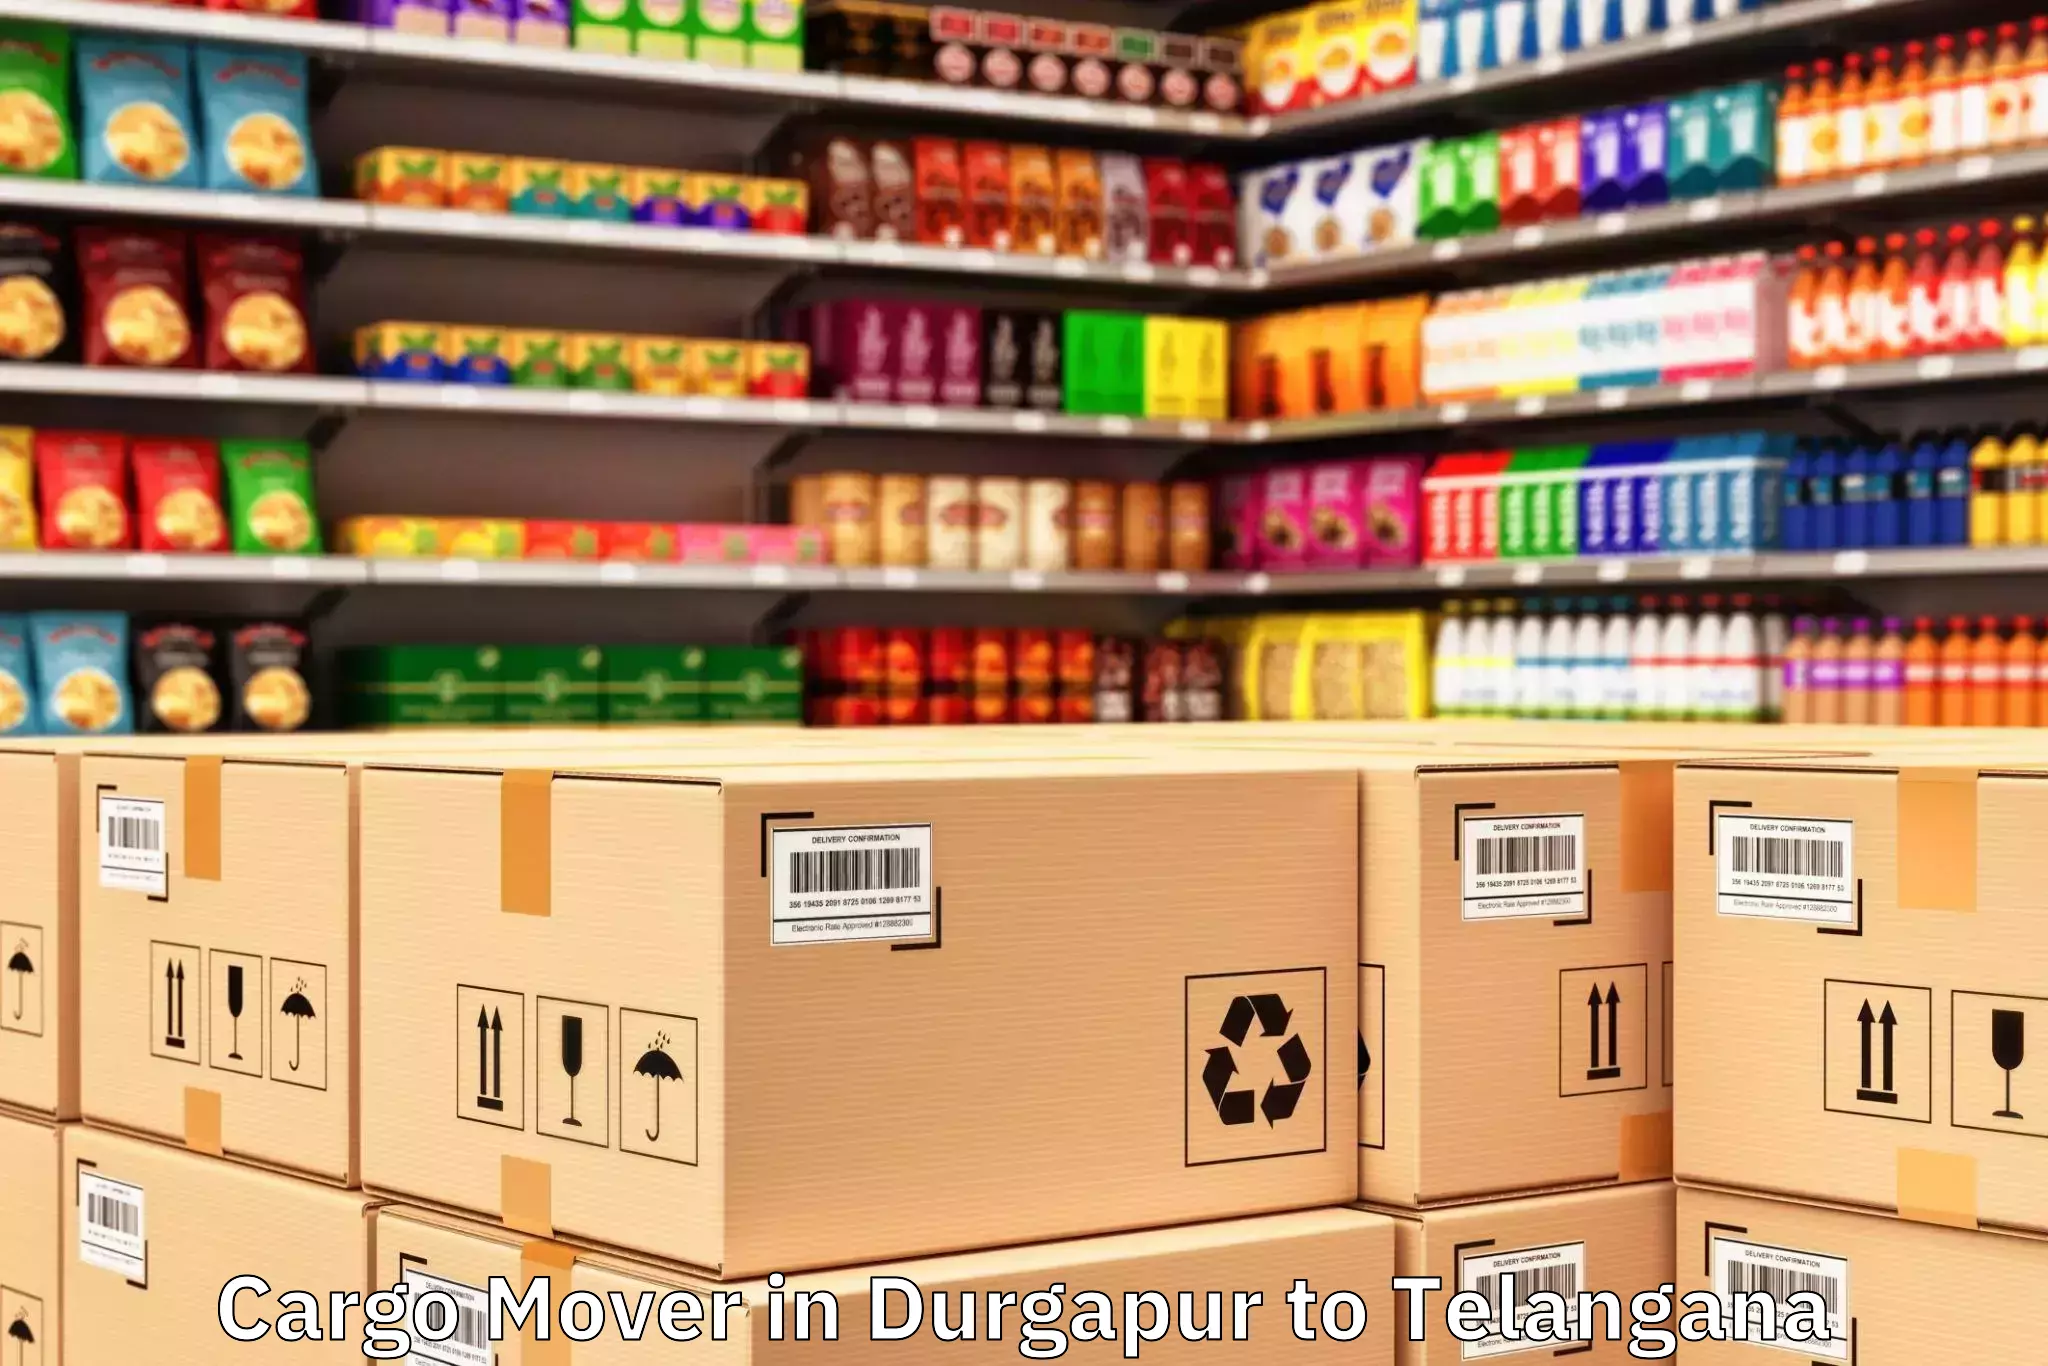 Top Durgapur to Alair Cargo Mover Available